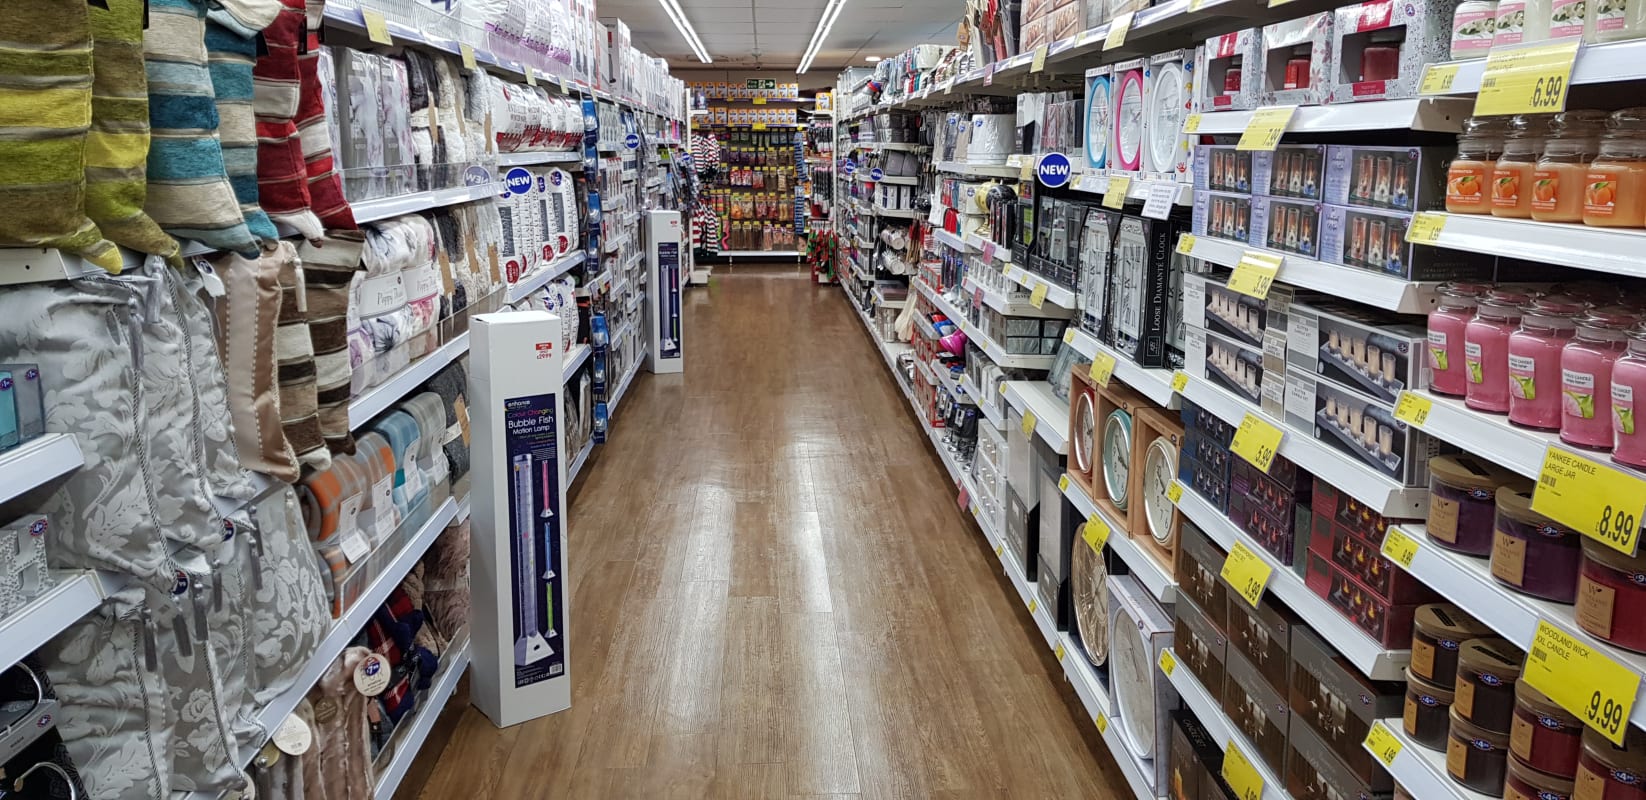 B&M Speke boasts a great range of homewares, from cushions and rugs to curtains and bedding.